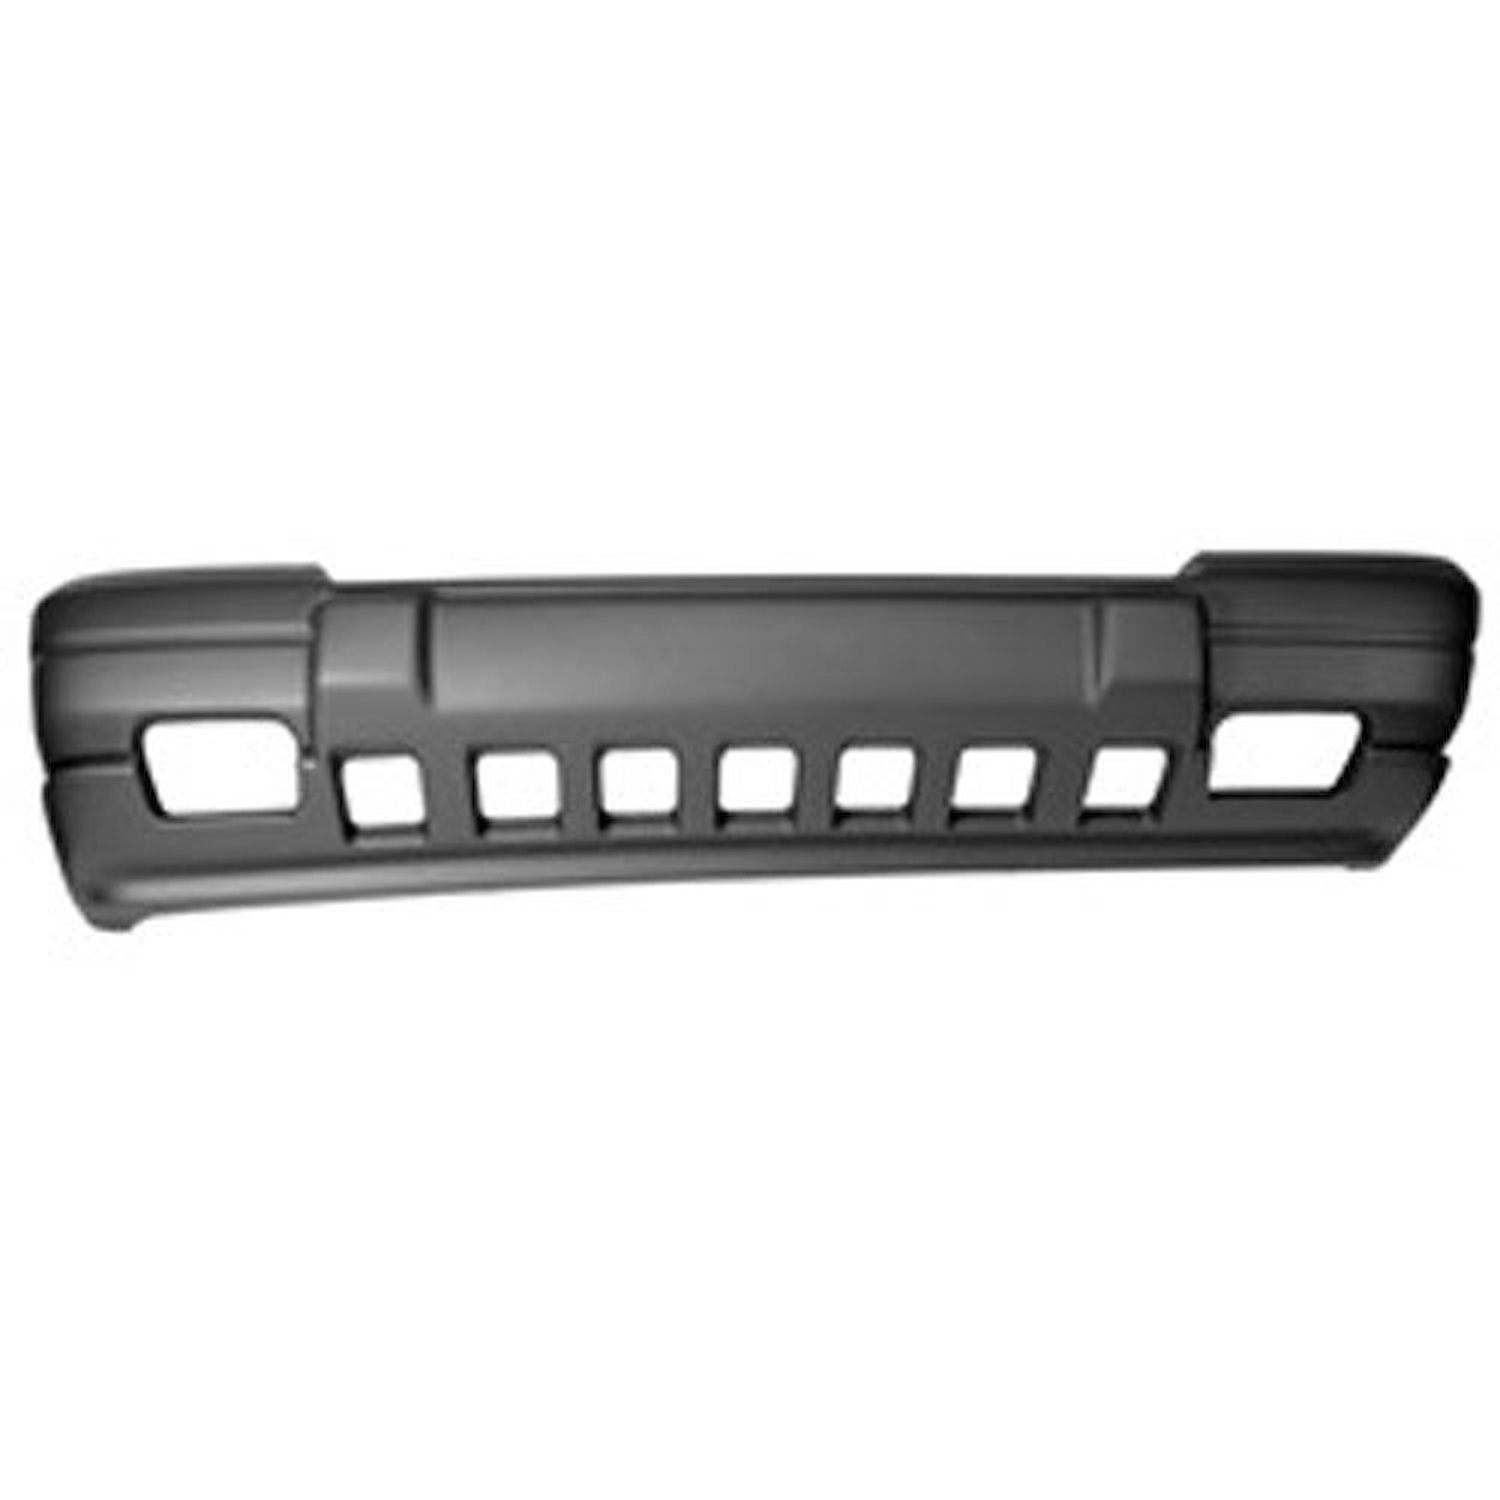 Stock replacement front bumper cover from Omix-ADA, Fits 96-98 Jeep Grand Cherokee ZJ Base Lared